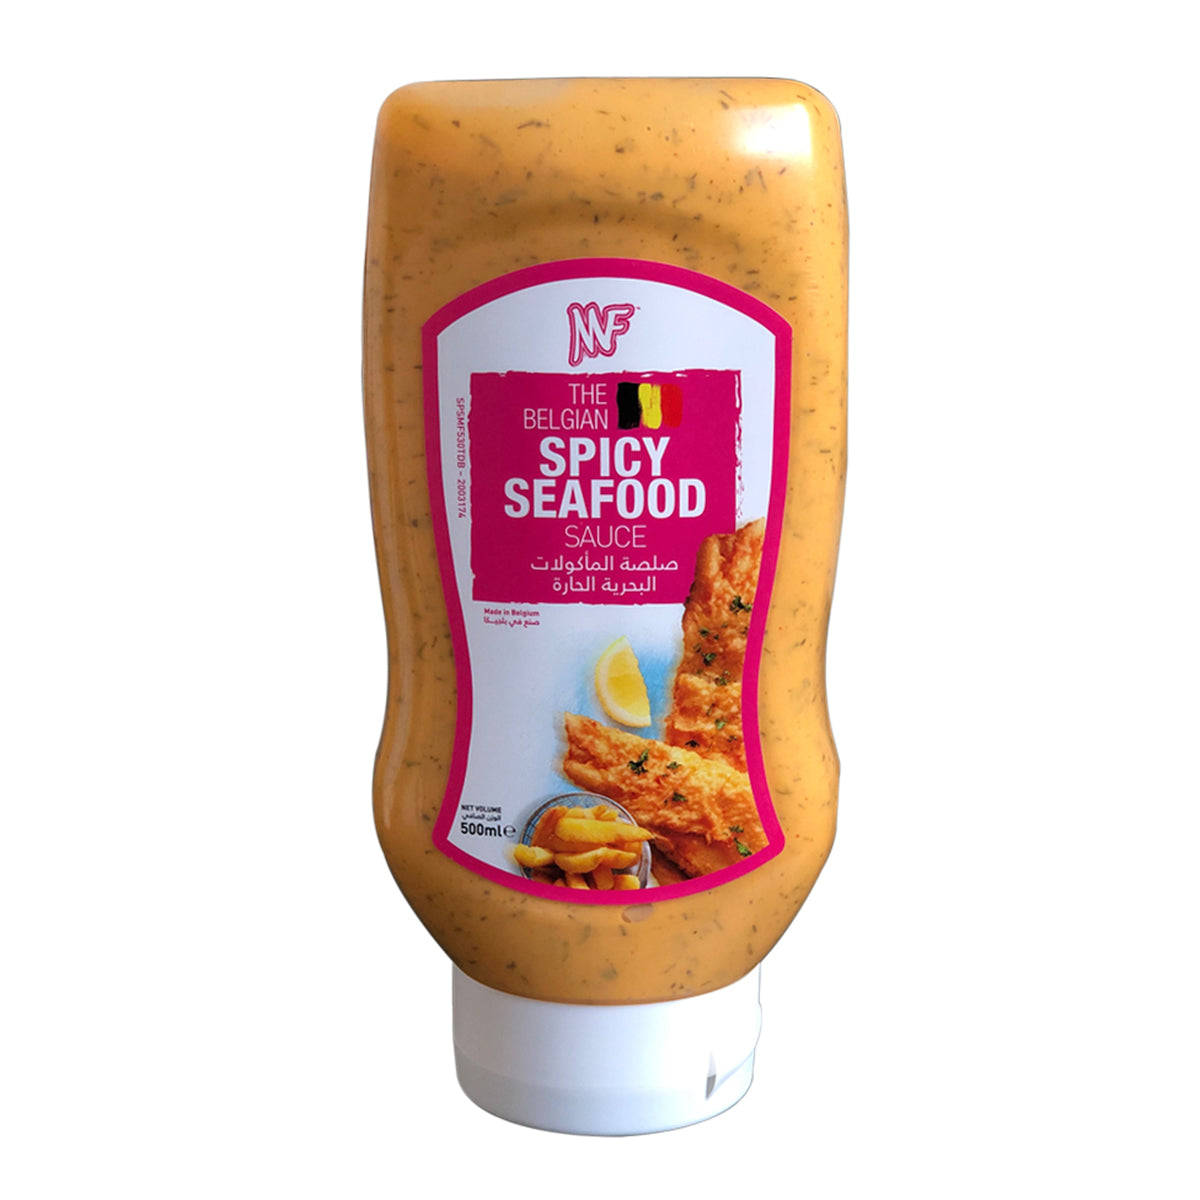 MF Spicy Seafood Sauce 500ml